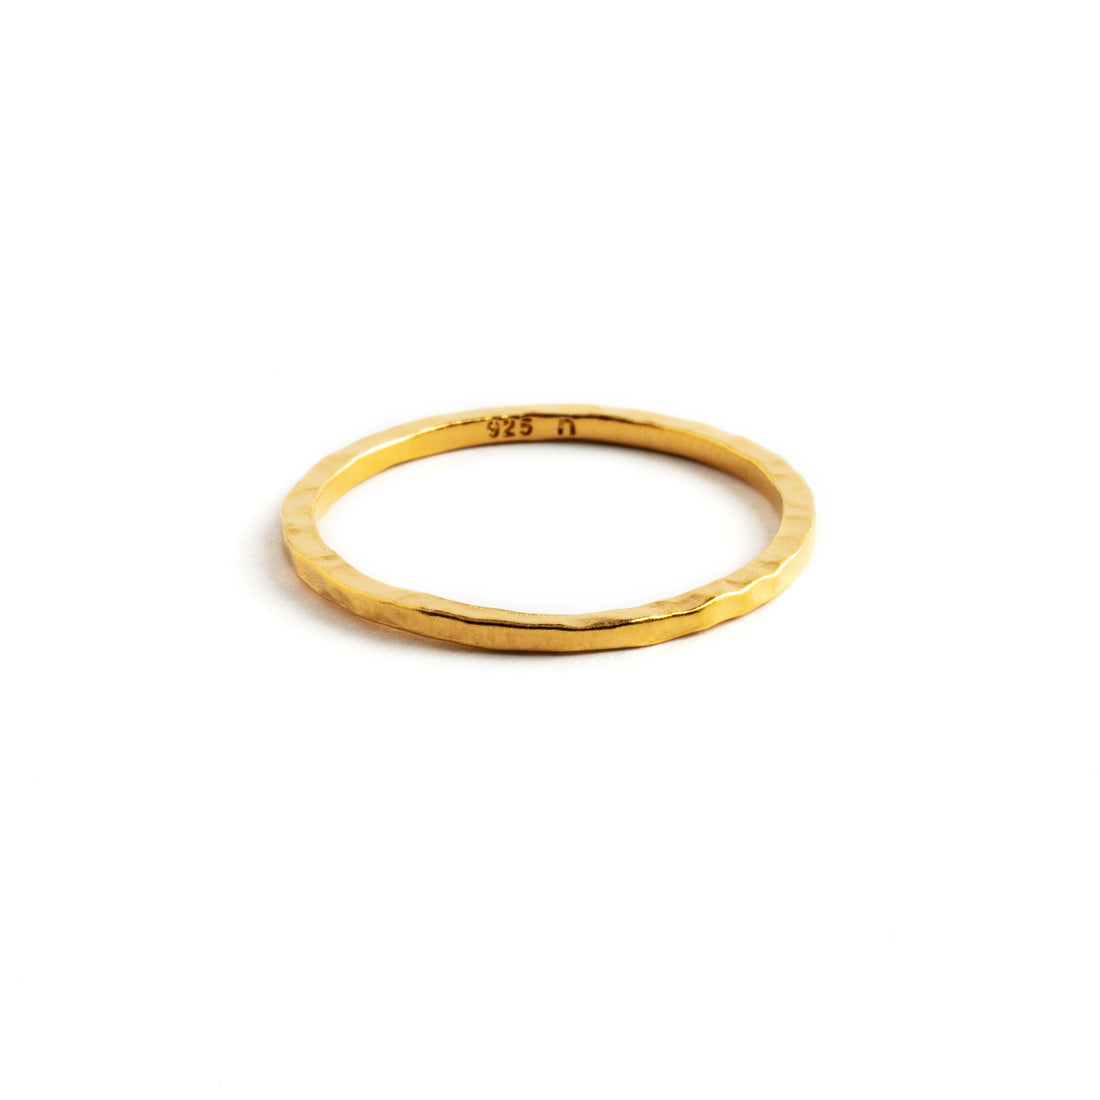 24k gold hammered stacking band ring frontal view